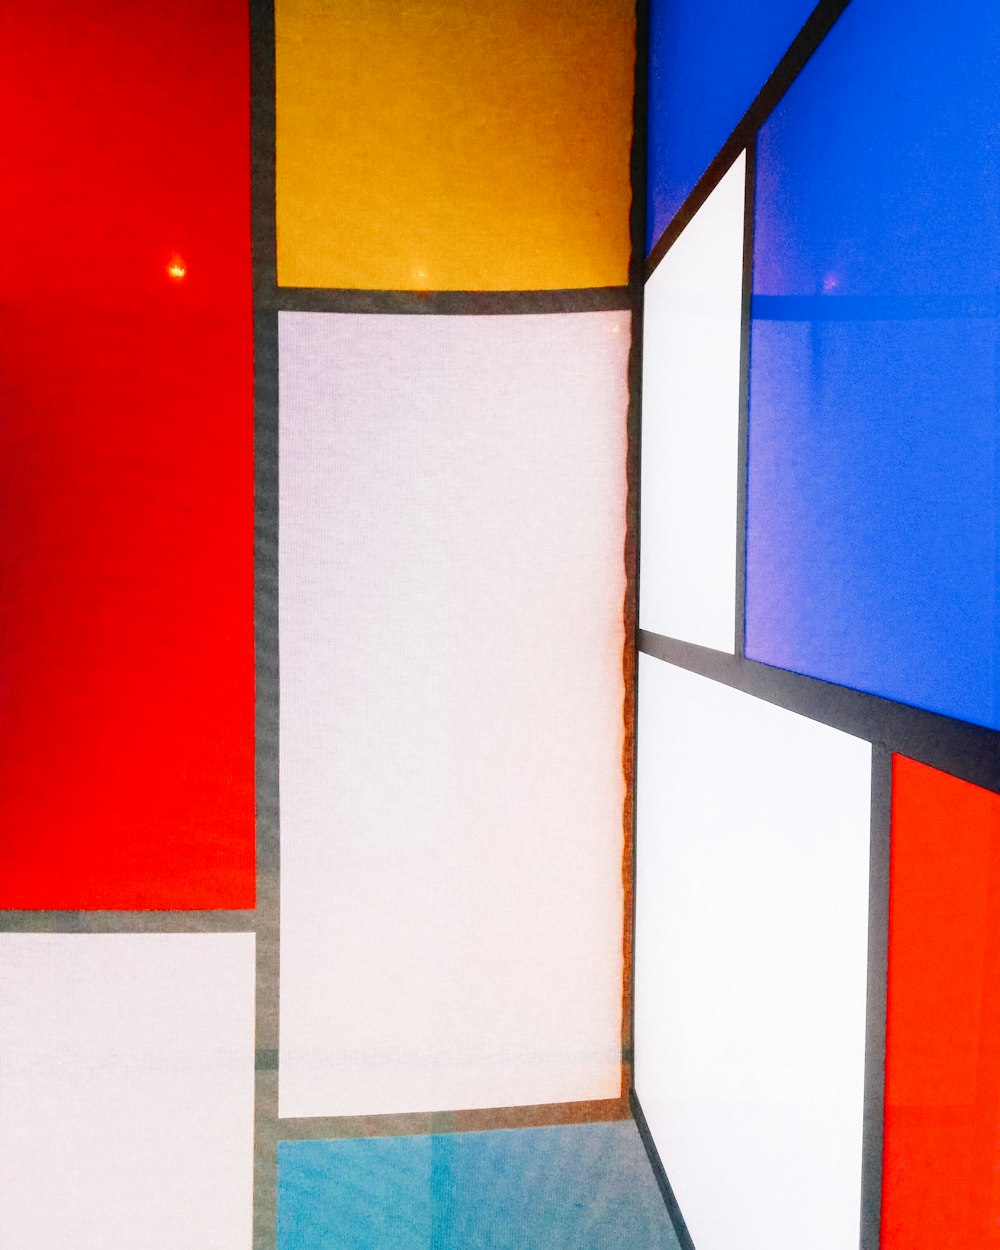 a multicolored room with a red, yellow, blue, and white wall